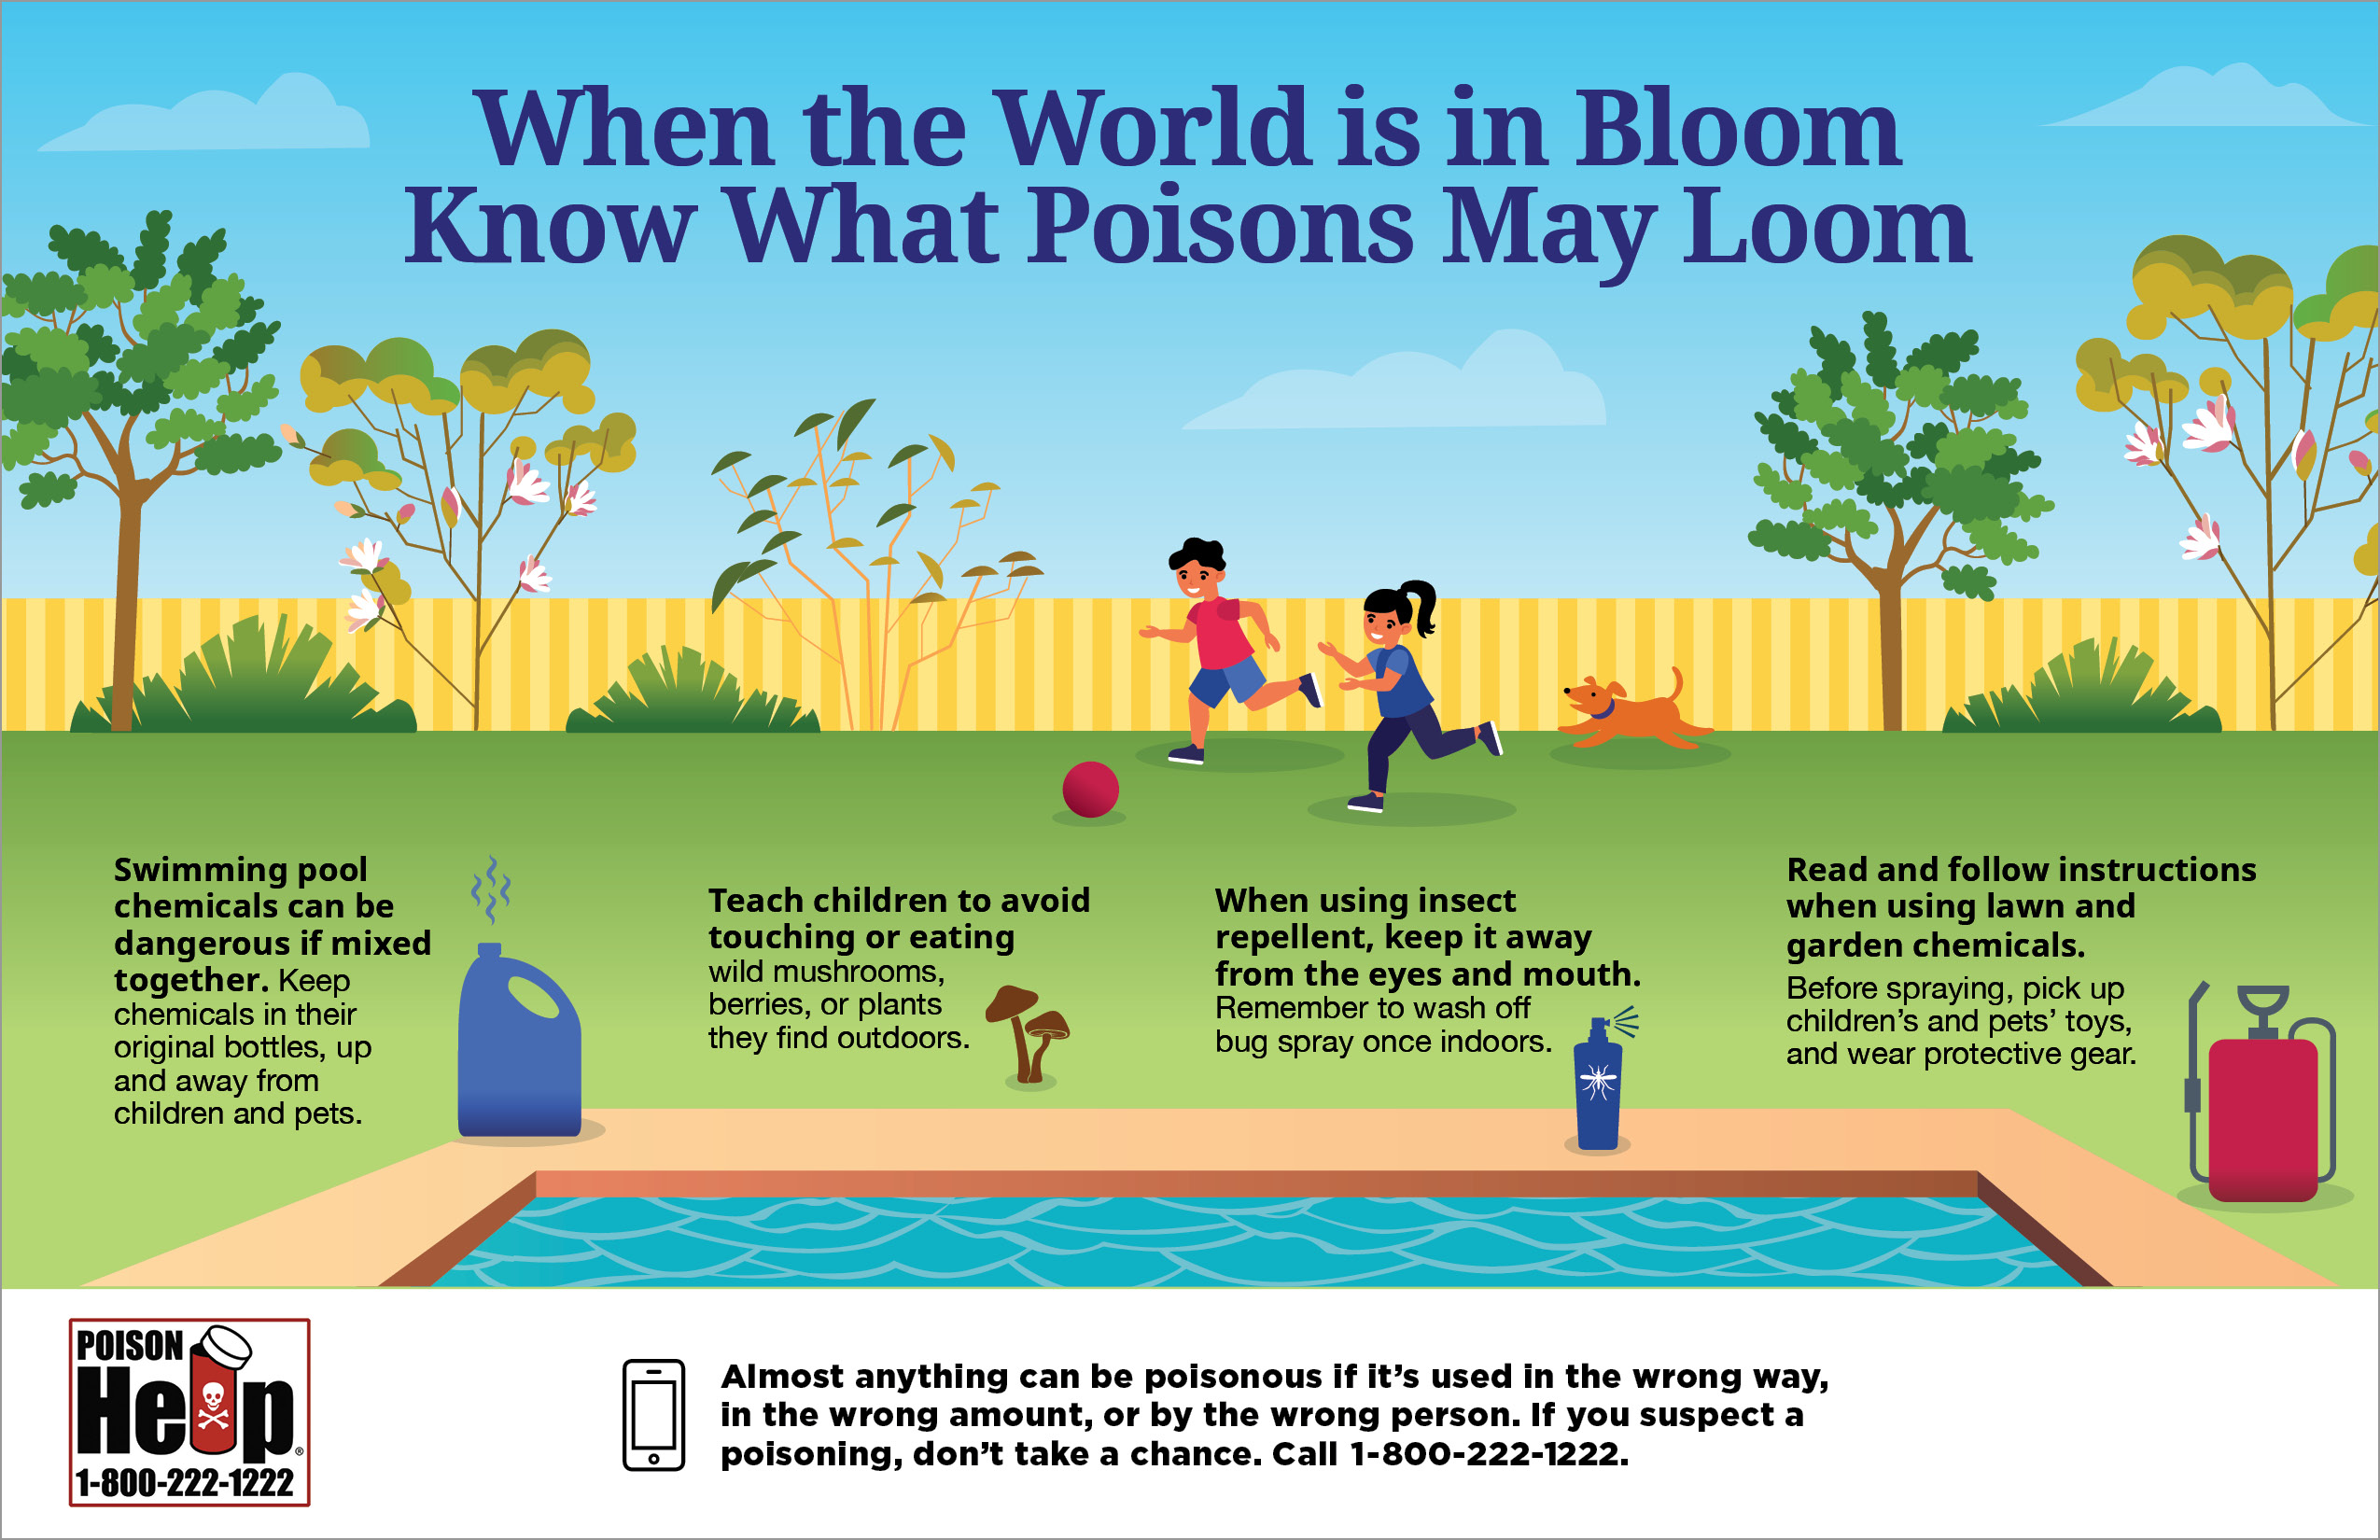 Children play in the backyard near poisons commonly used in the spring and summertime including pool chemicals, mushrooms, insect repellant and lawn and garden chemcials.